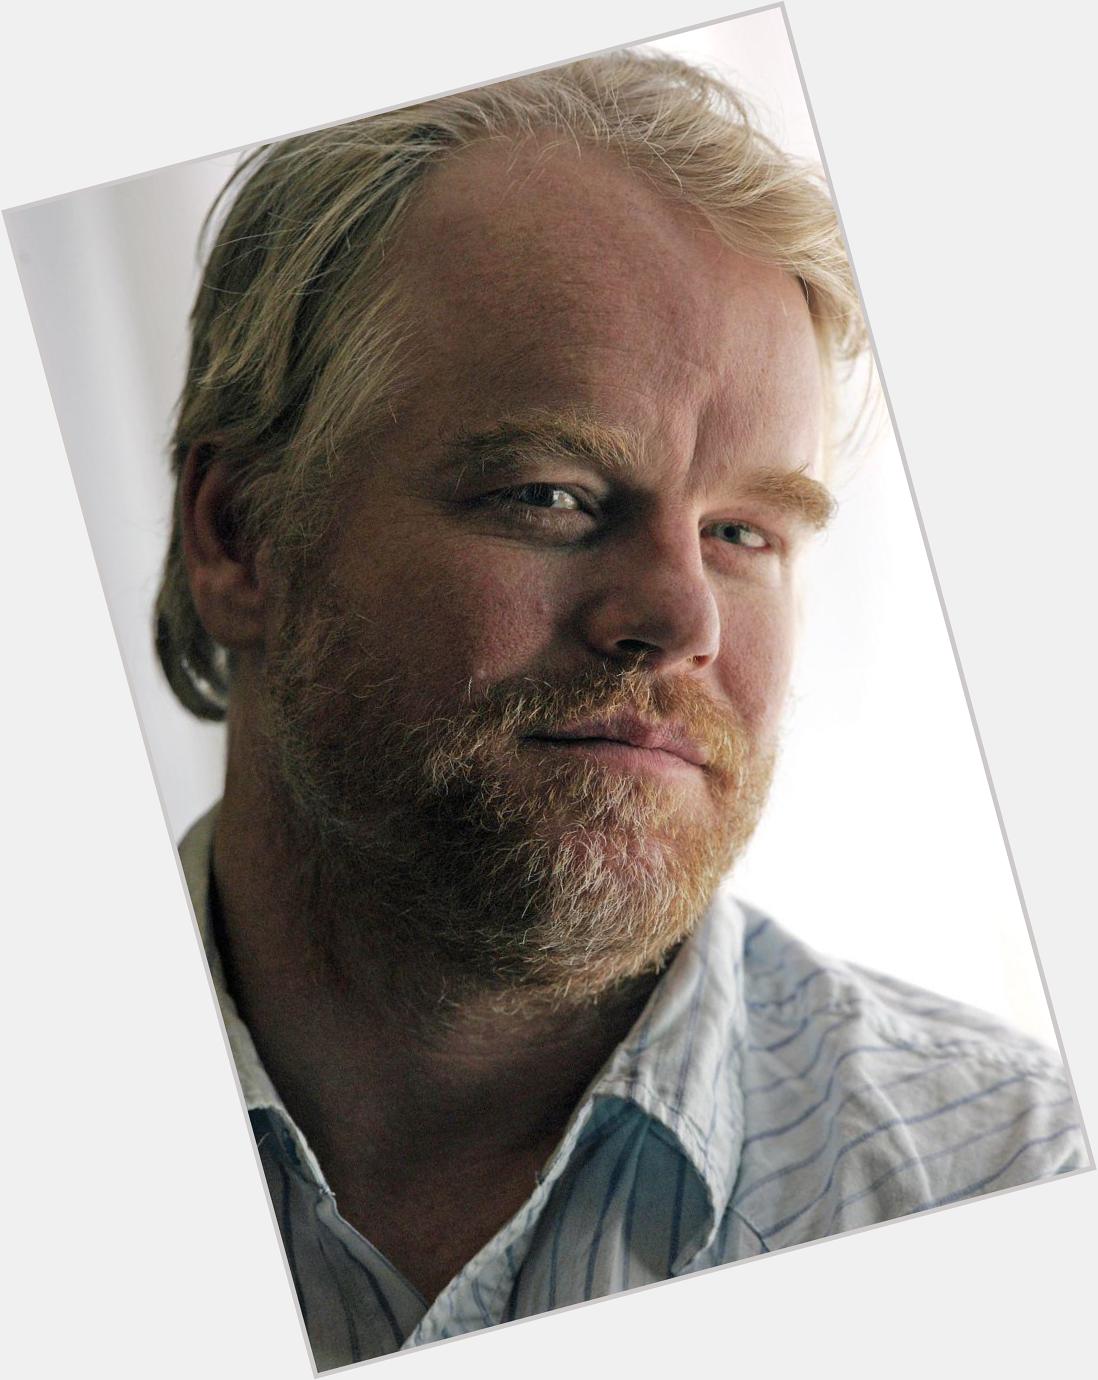 Happy Birthday to Philip Seymour Hoffman would have been 48 years old today. A Upsetting Actor. 